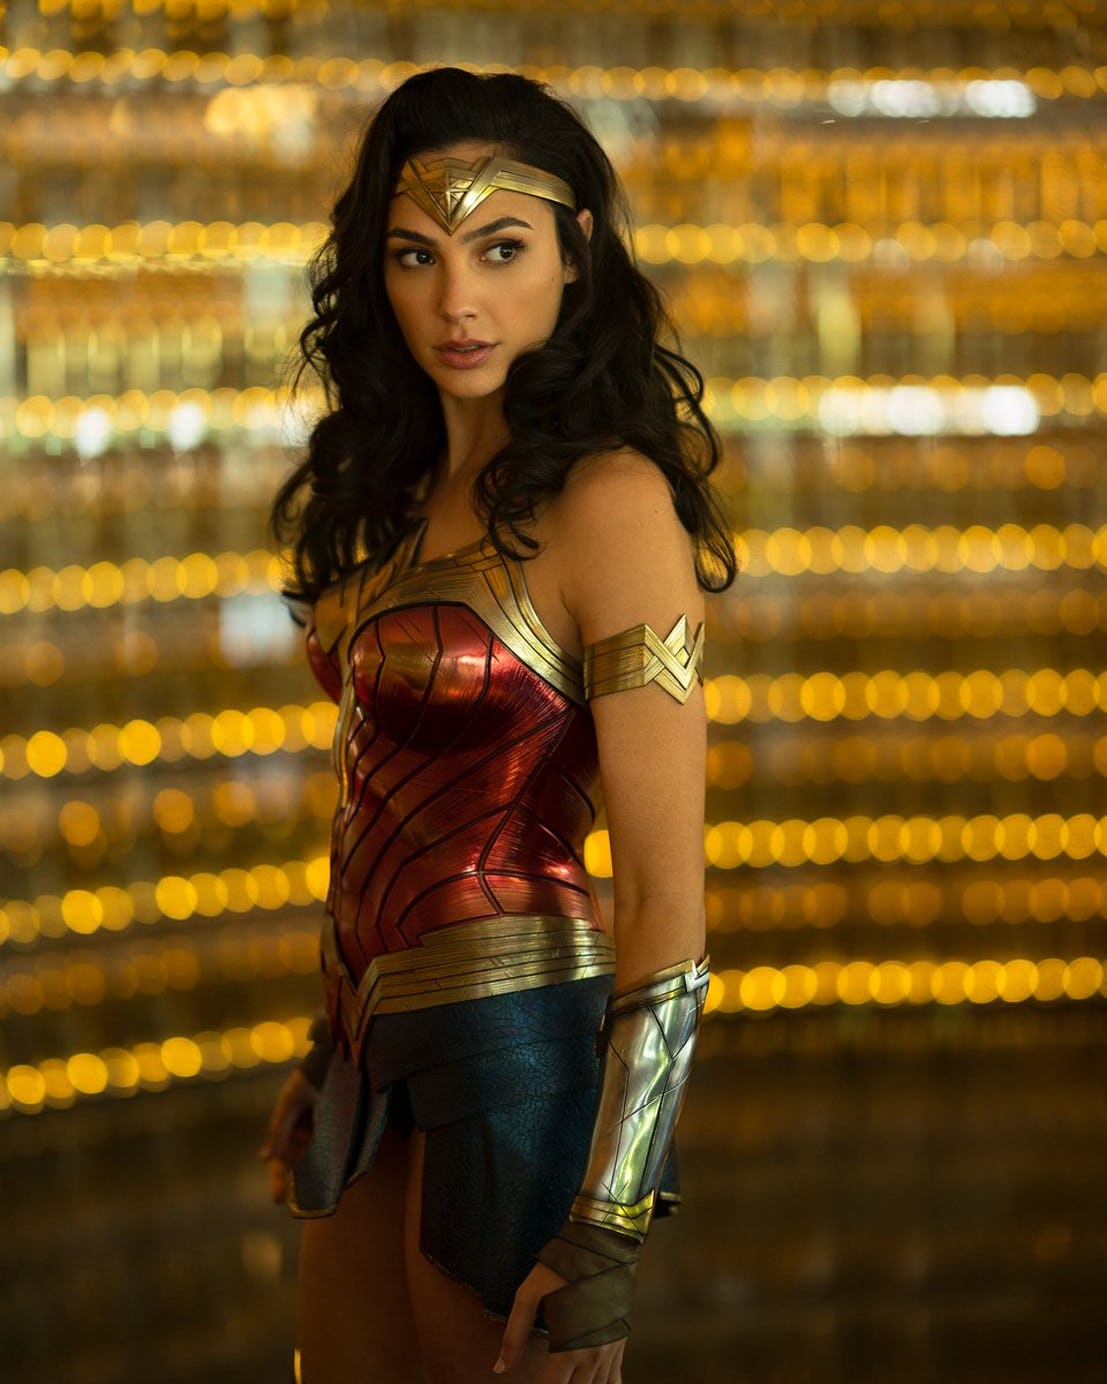 Gal Gadot is Back in the Wonder Woman costume – Fitness 